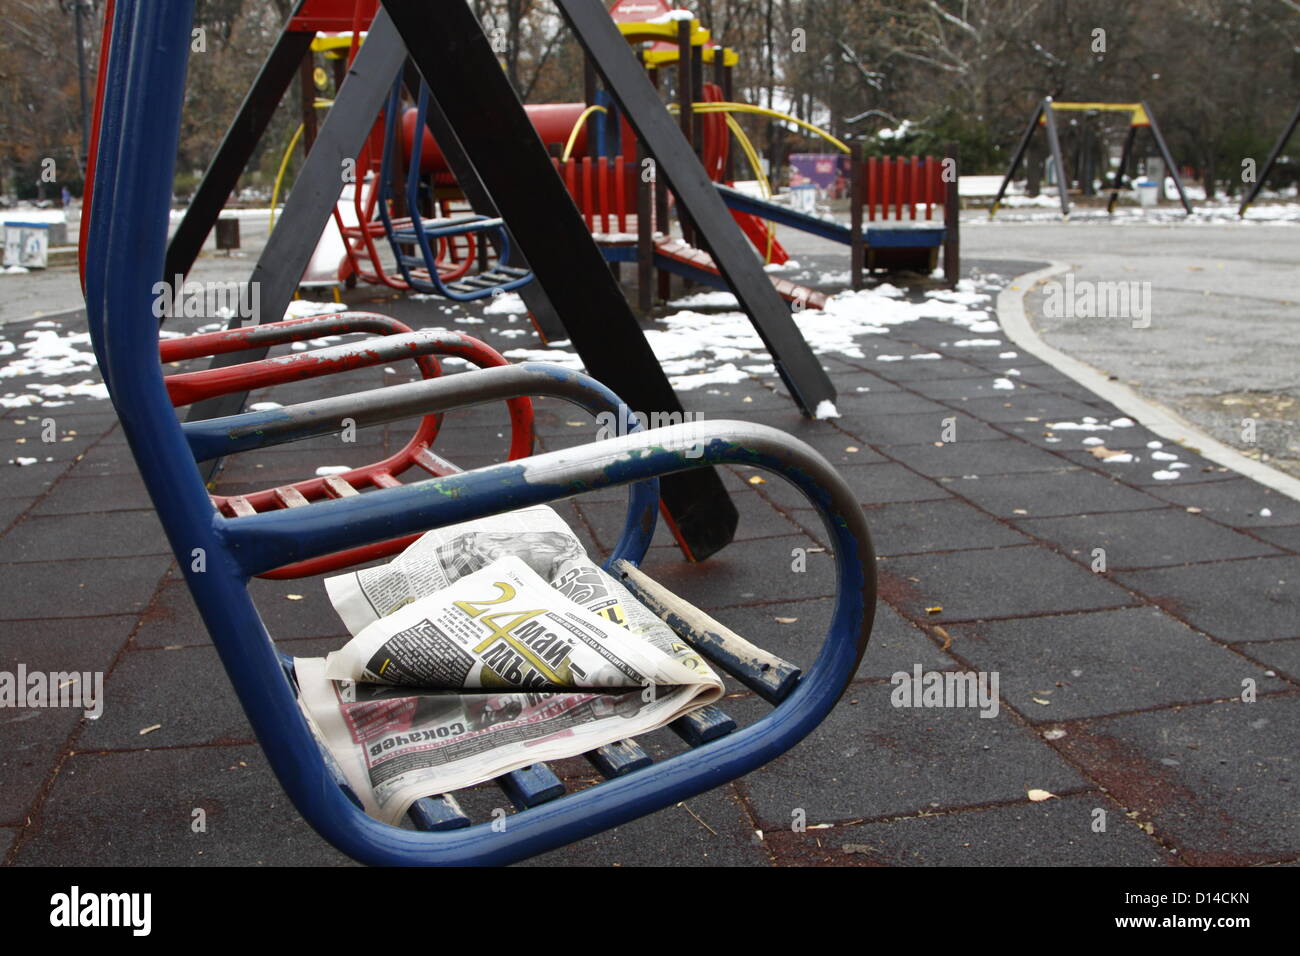 Sofia, Bulgaria. 6th December 2012. Children's swings on a playground in Sofia's Borisova park. Like many other recreational facilities in the Bulgarian capital, the playground suffer from poor maintenance and general neglect. Credit:  Johann Brandstatter / Alamy Live News Stock Photo